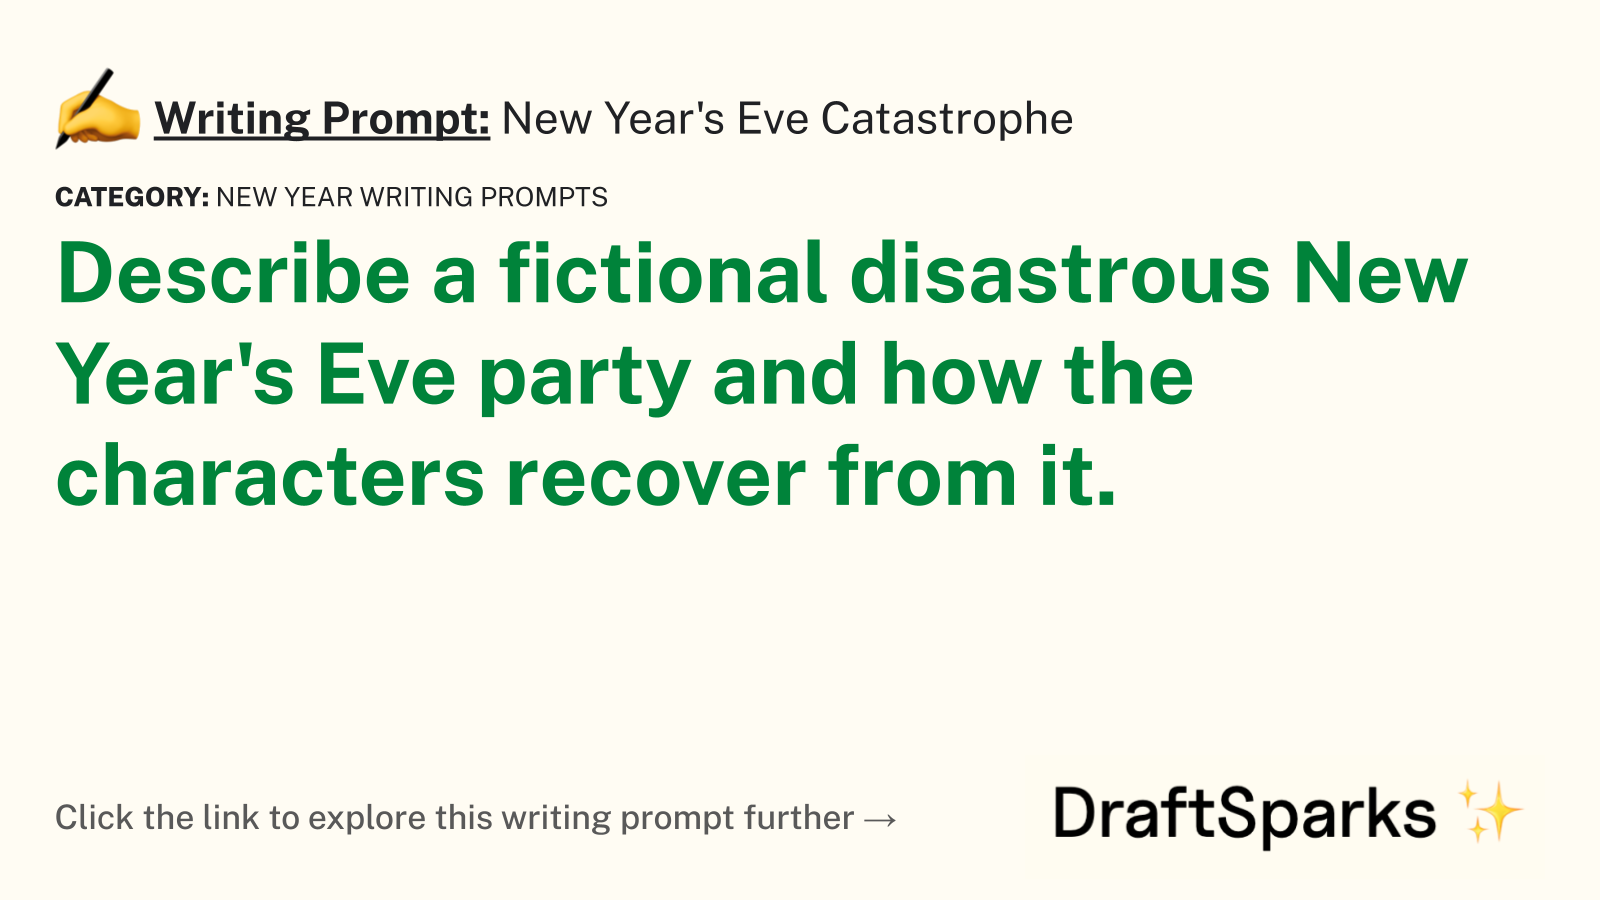 New Year’s Eve Catastrophe